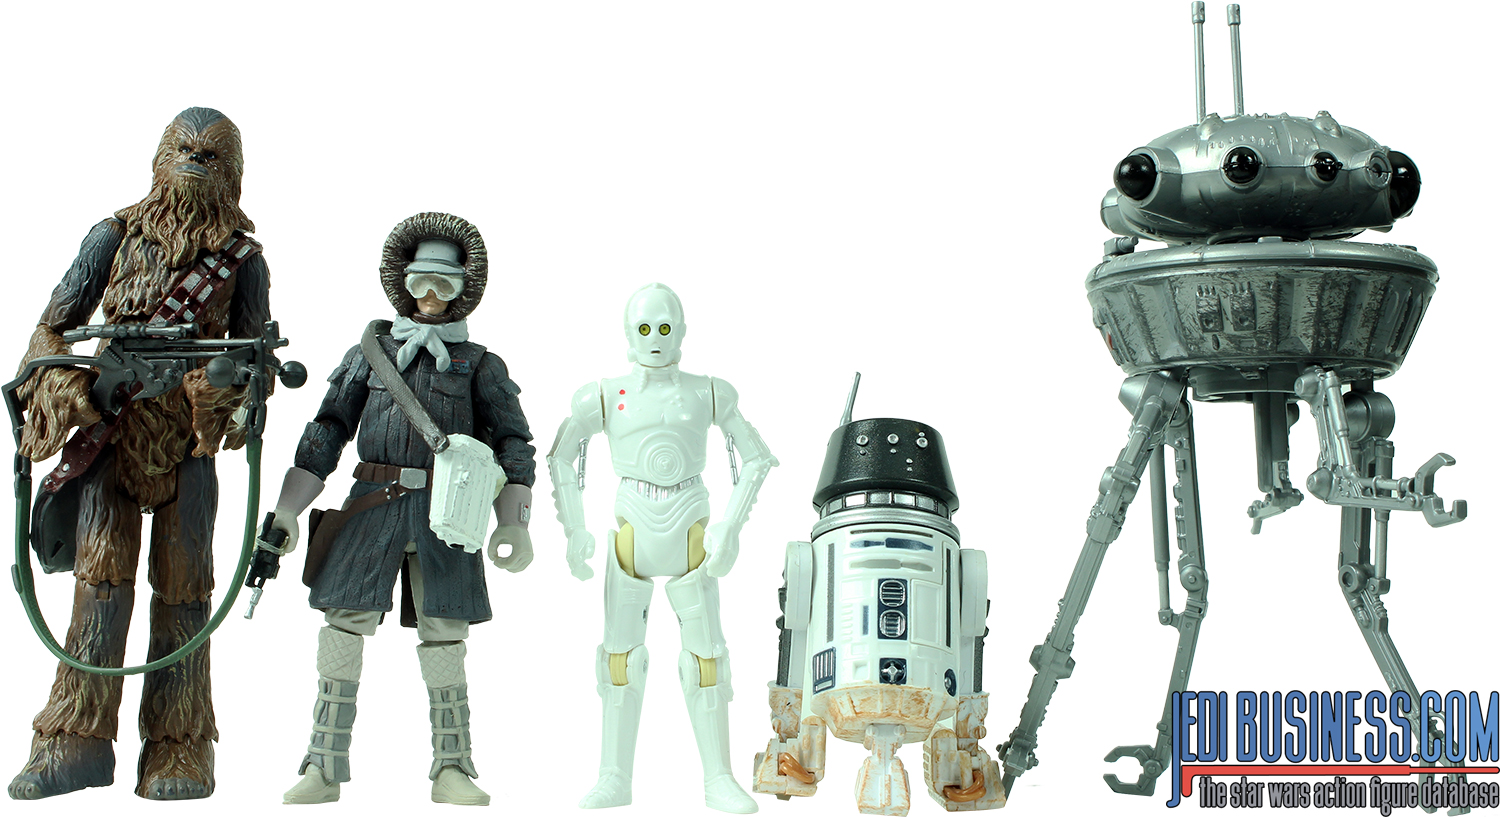 Chewbacca Hoth Recon Patrol 5-Pack